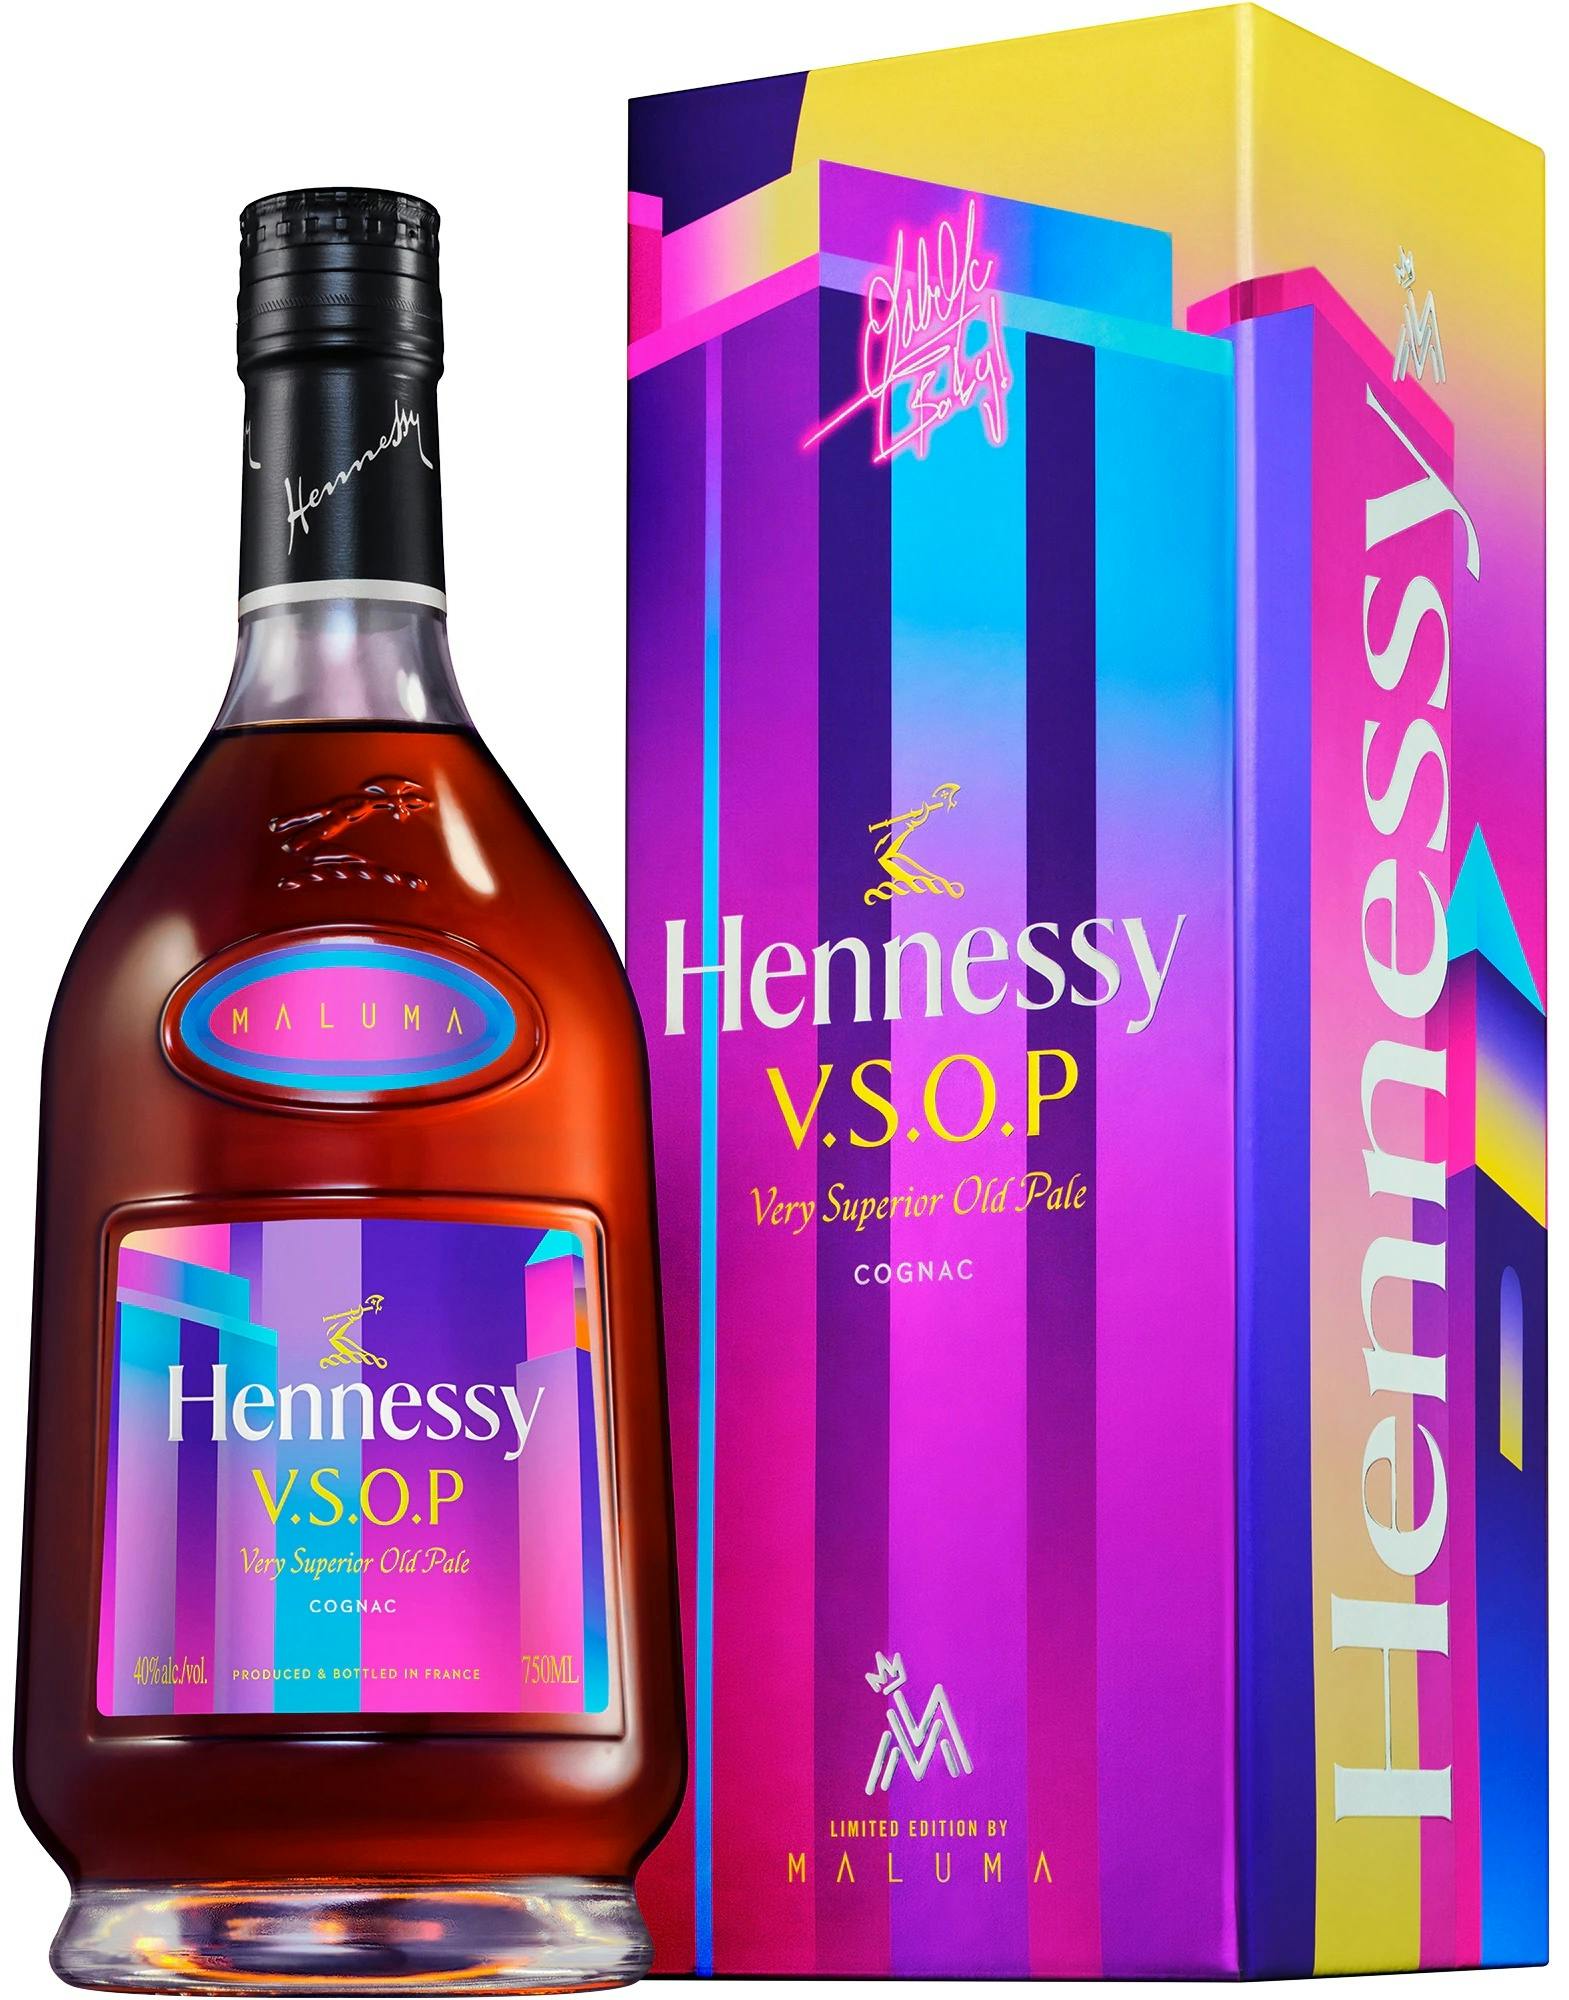 Hennessy V.S.O.P releases limited edition designed by global Latin  sensation Maluma - LVMH